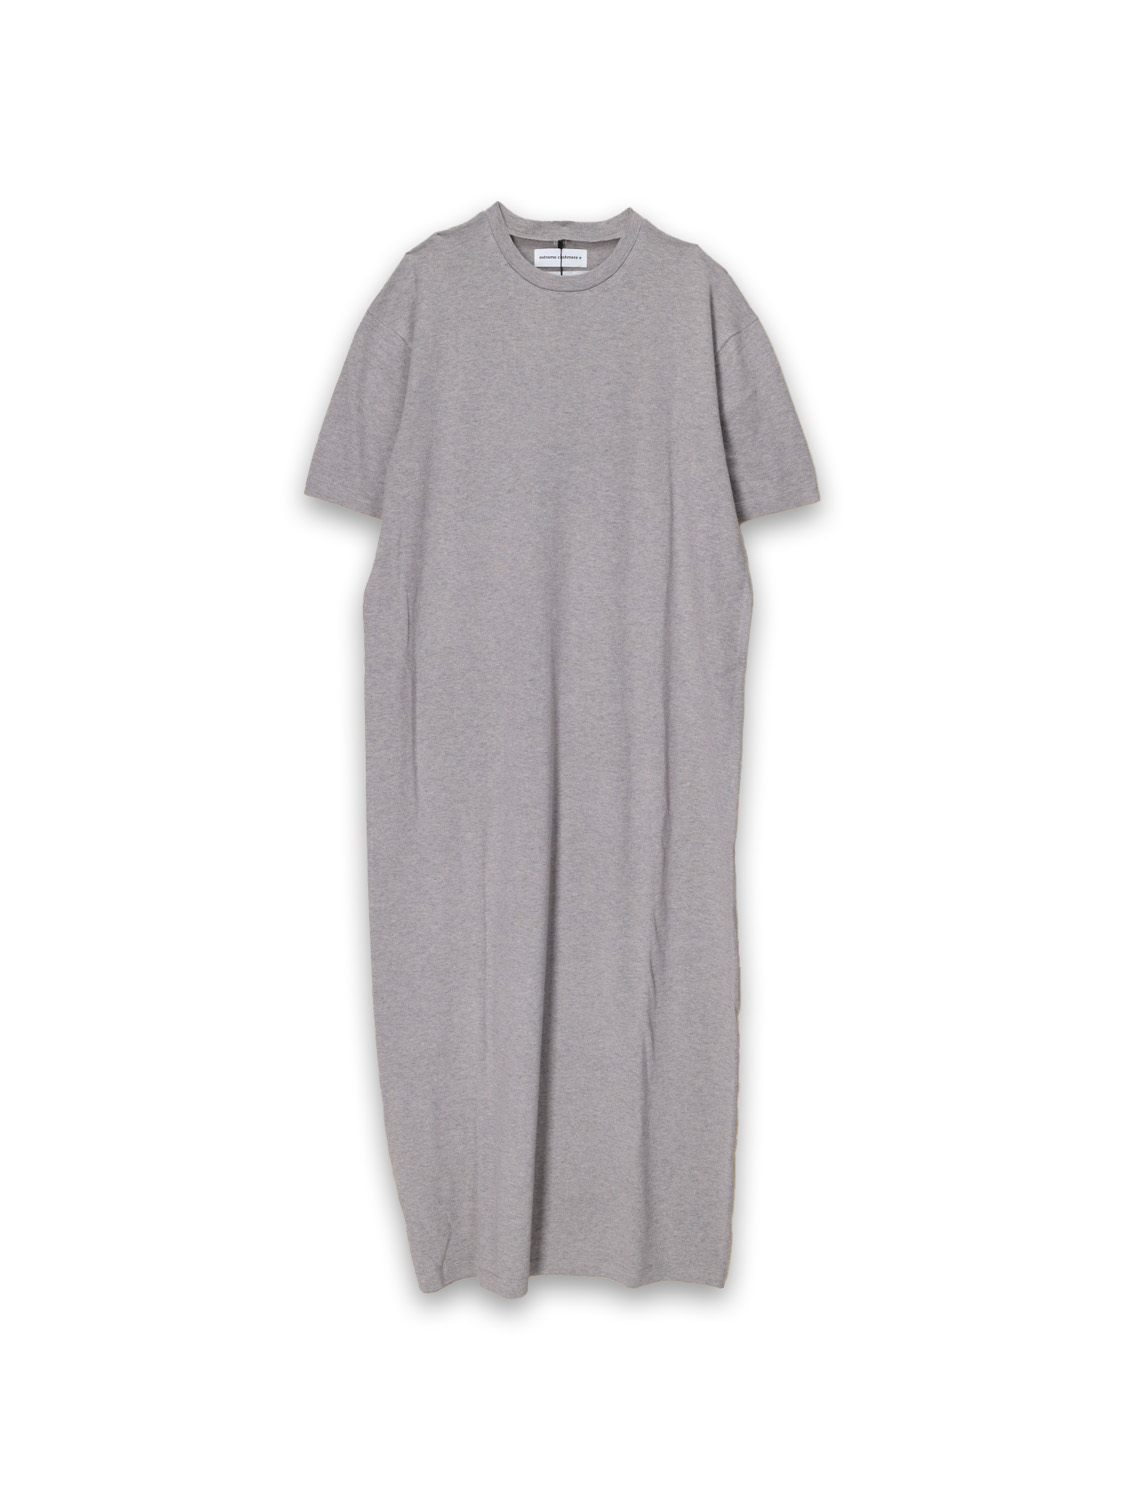 Kris – Oversized T-shirt dress made from a cashmere and cotton blend 